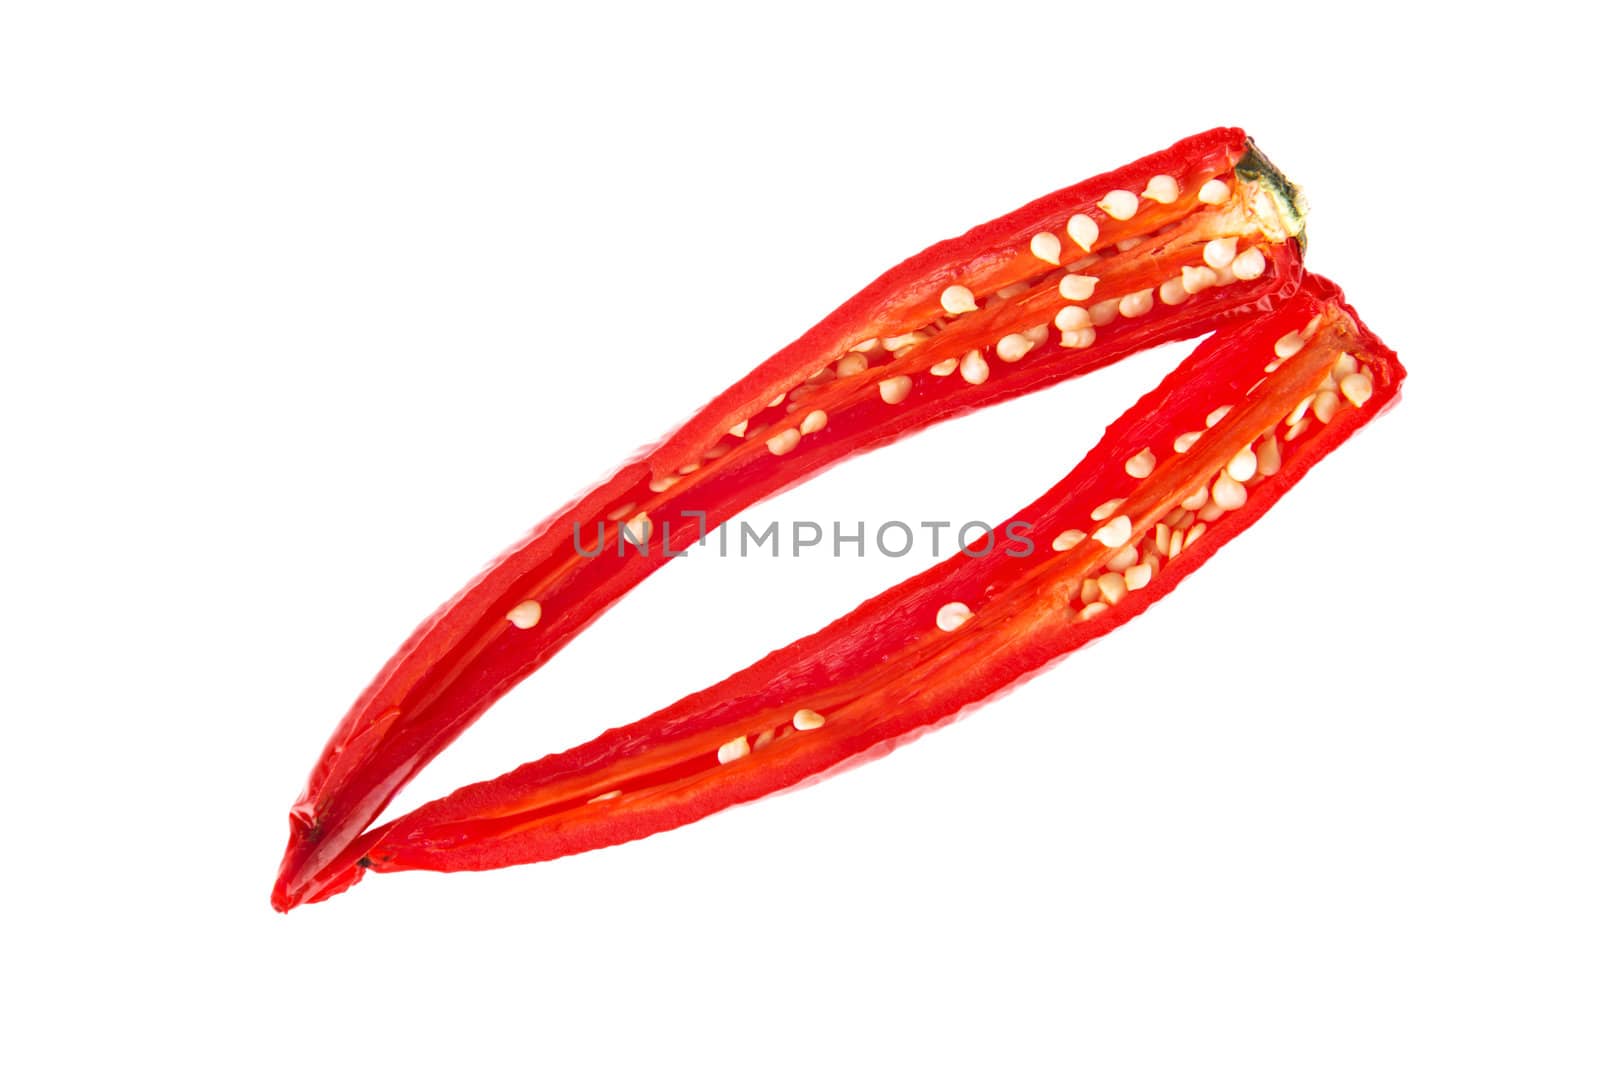 Red hot chilie pepper by BDS